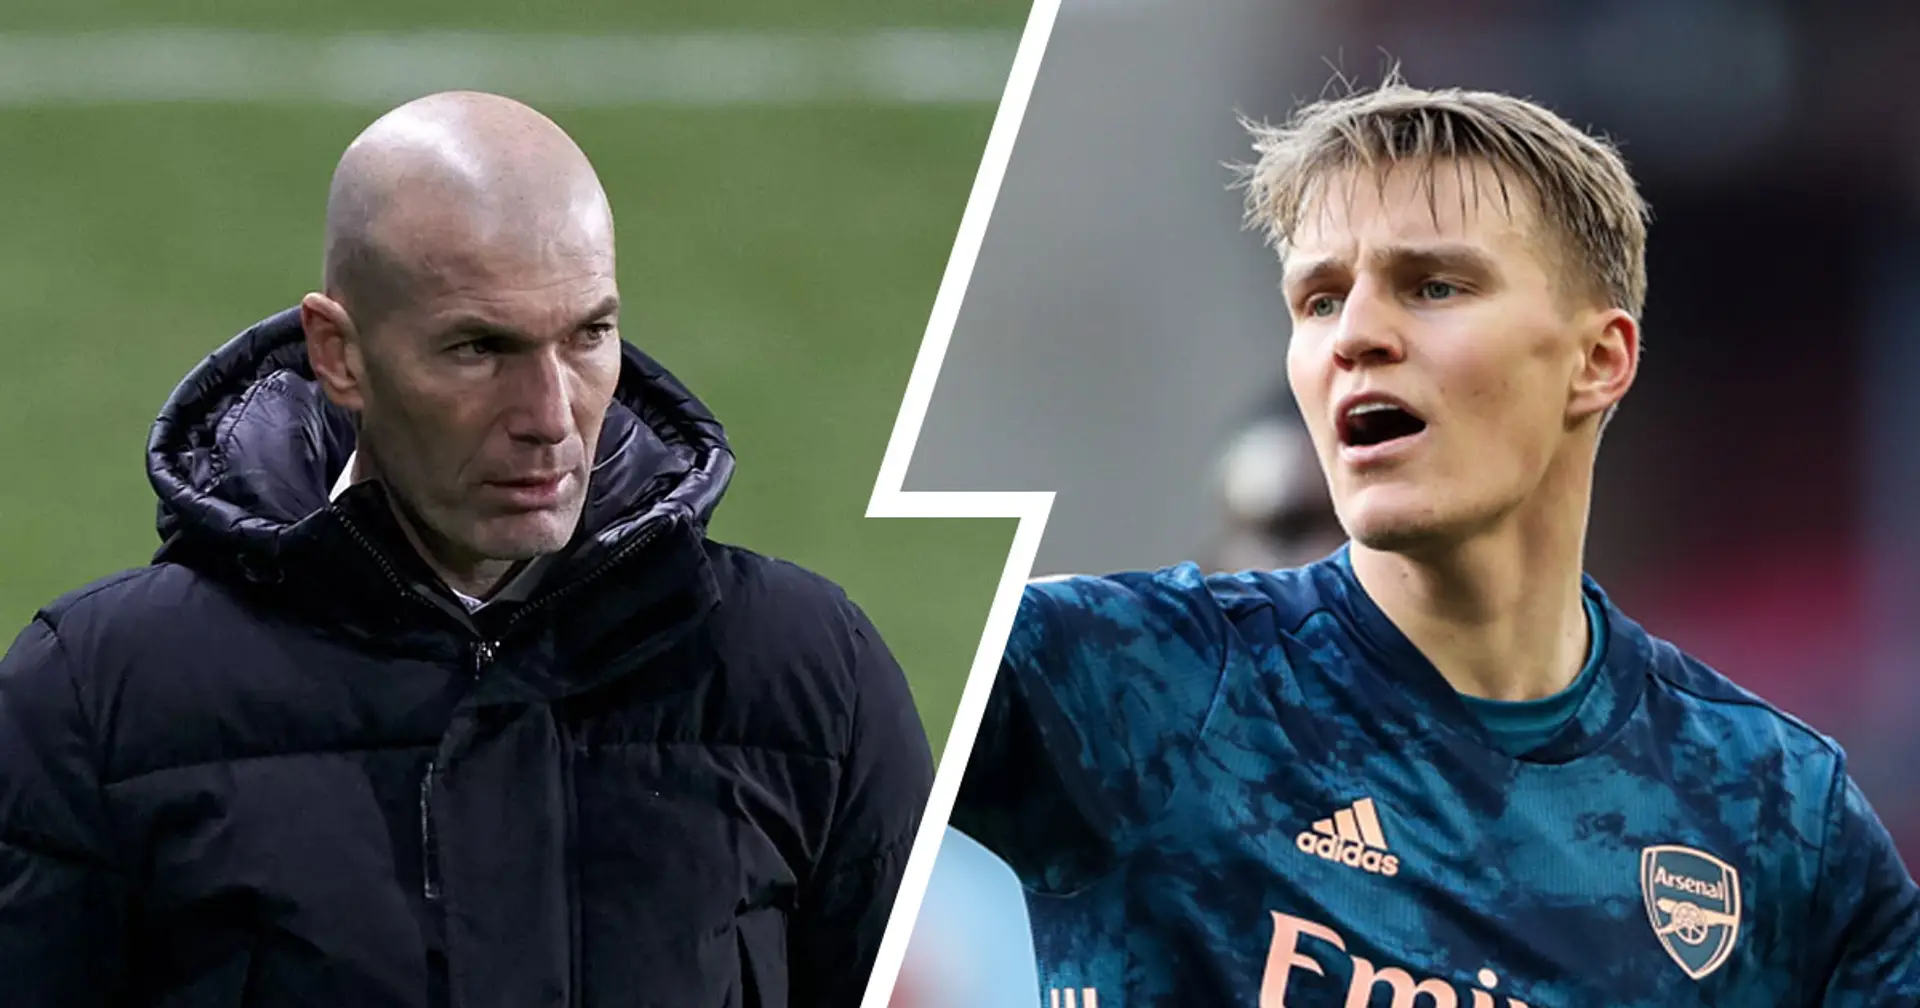 Martin Odegaard won't return to Madrid if Zinedine Zidane remains in charge (reliability: 4 stars)